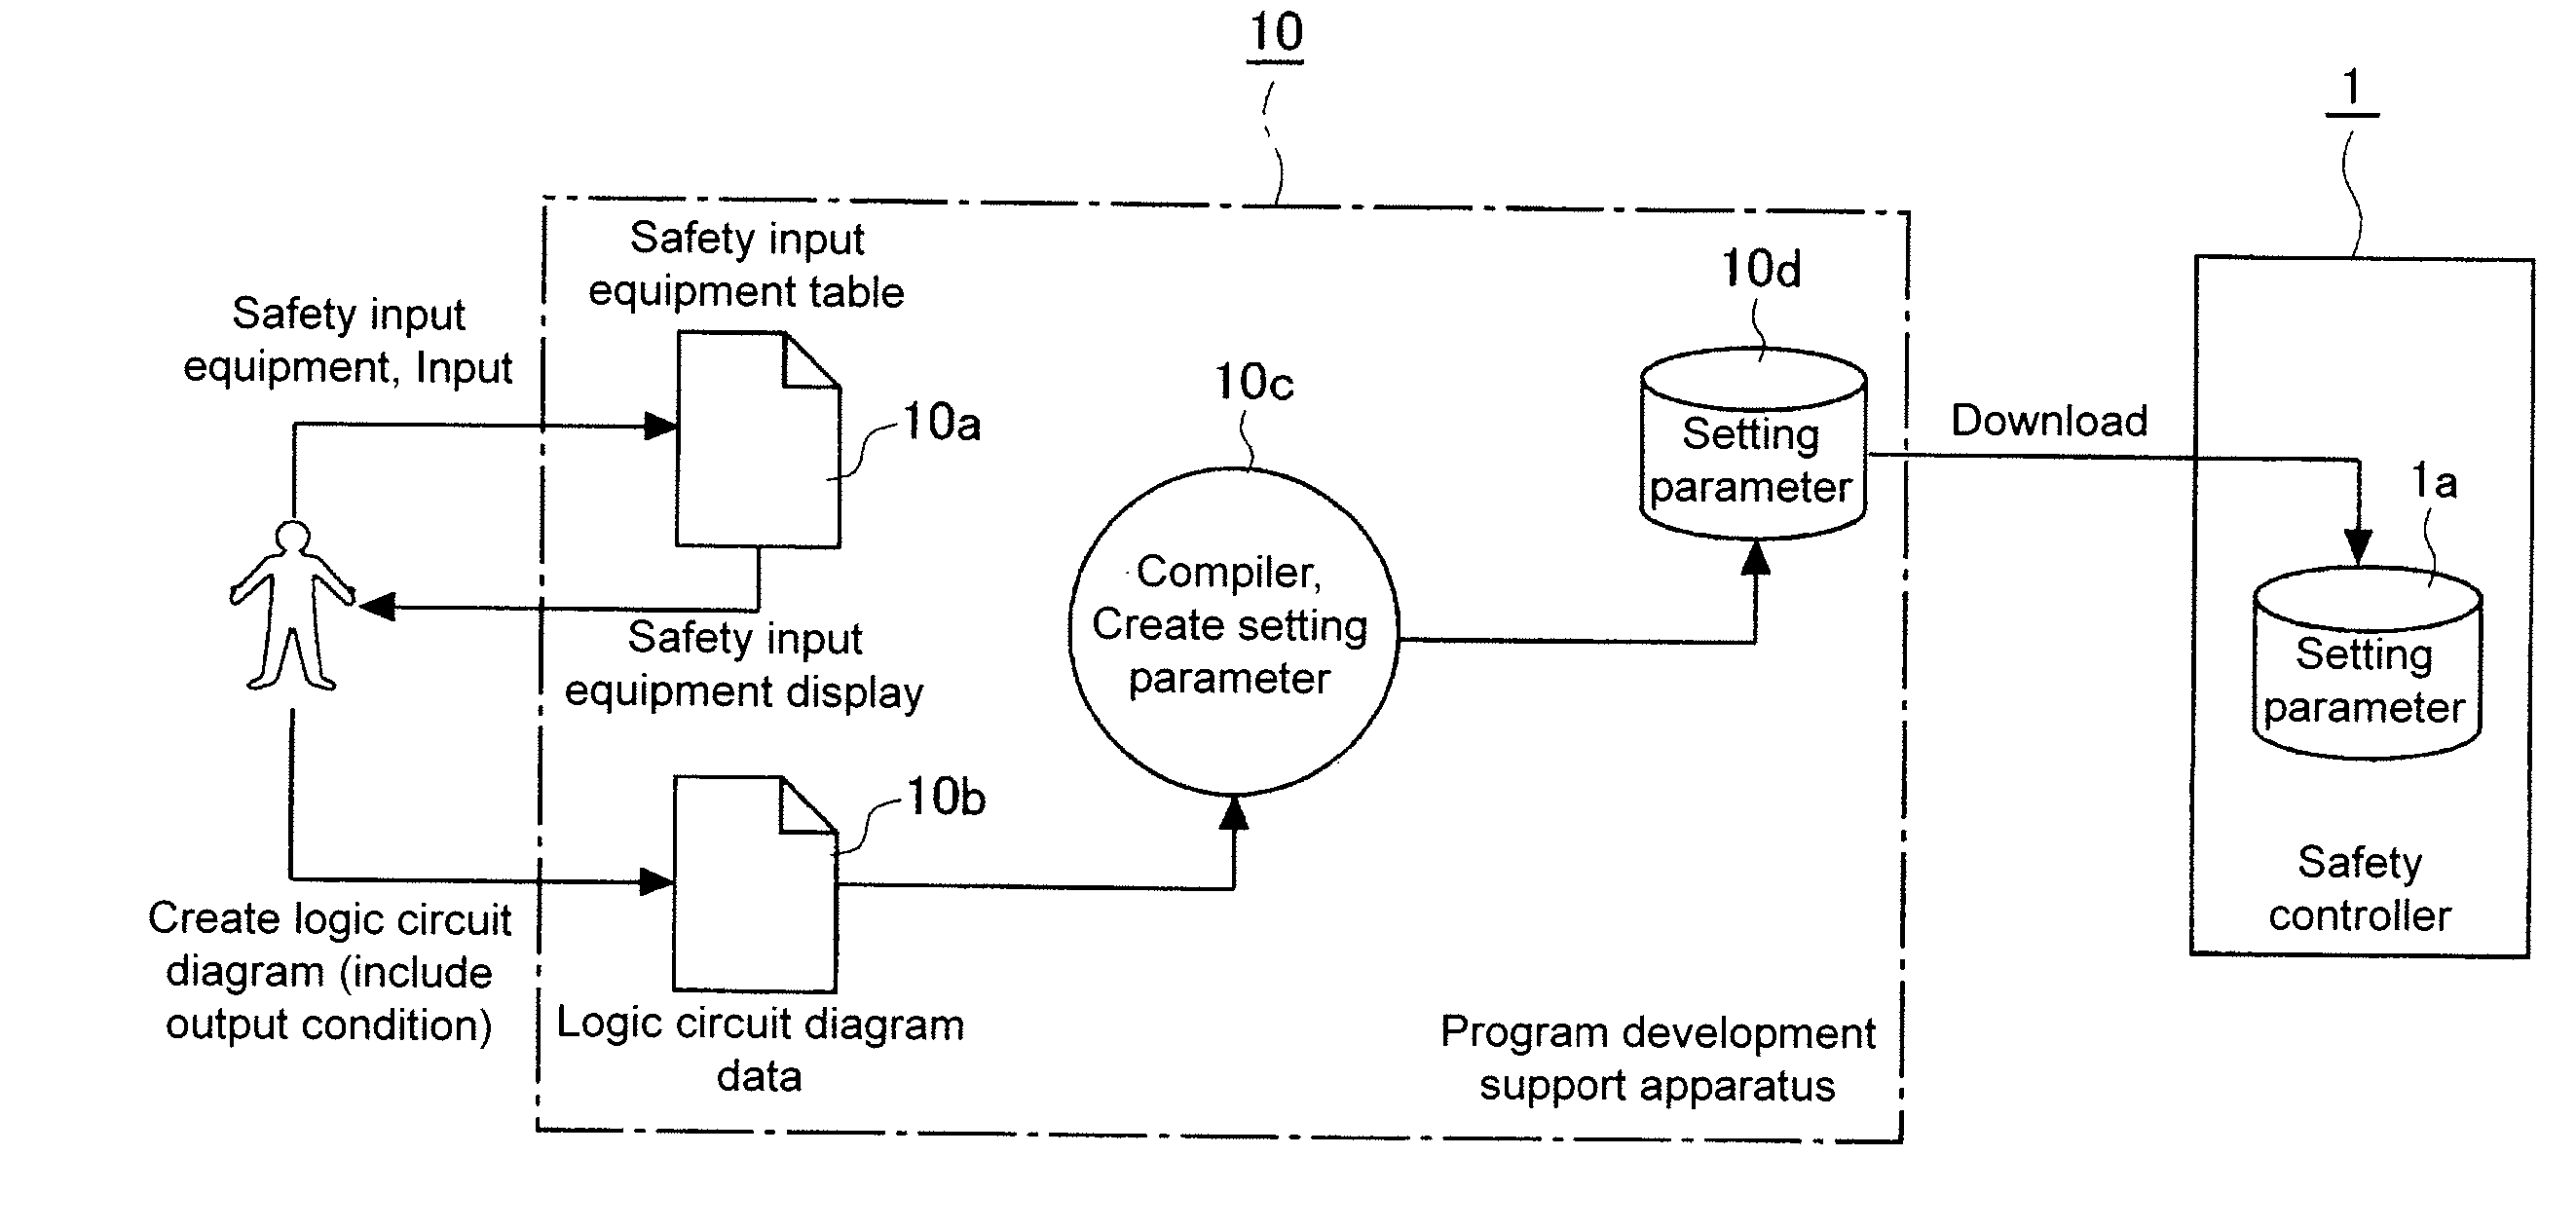 Program development support apparatus of safety controller